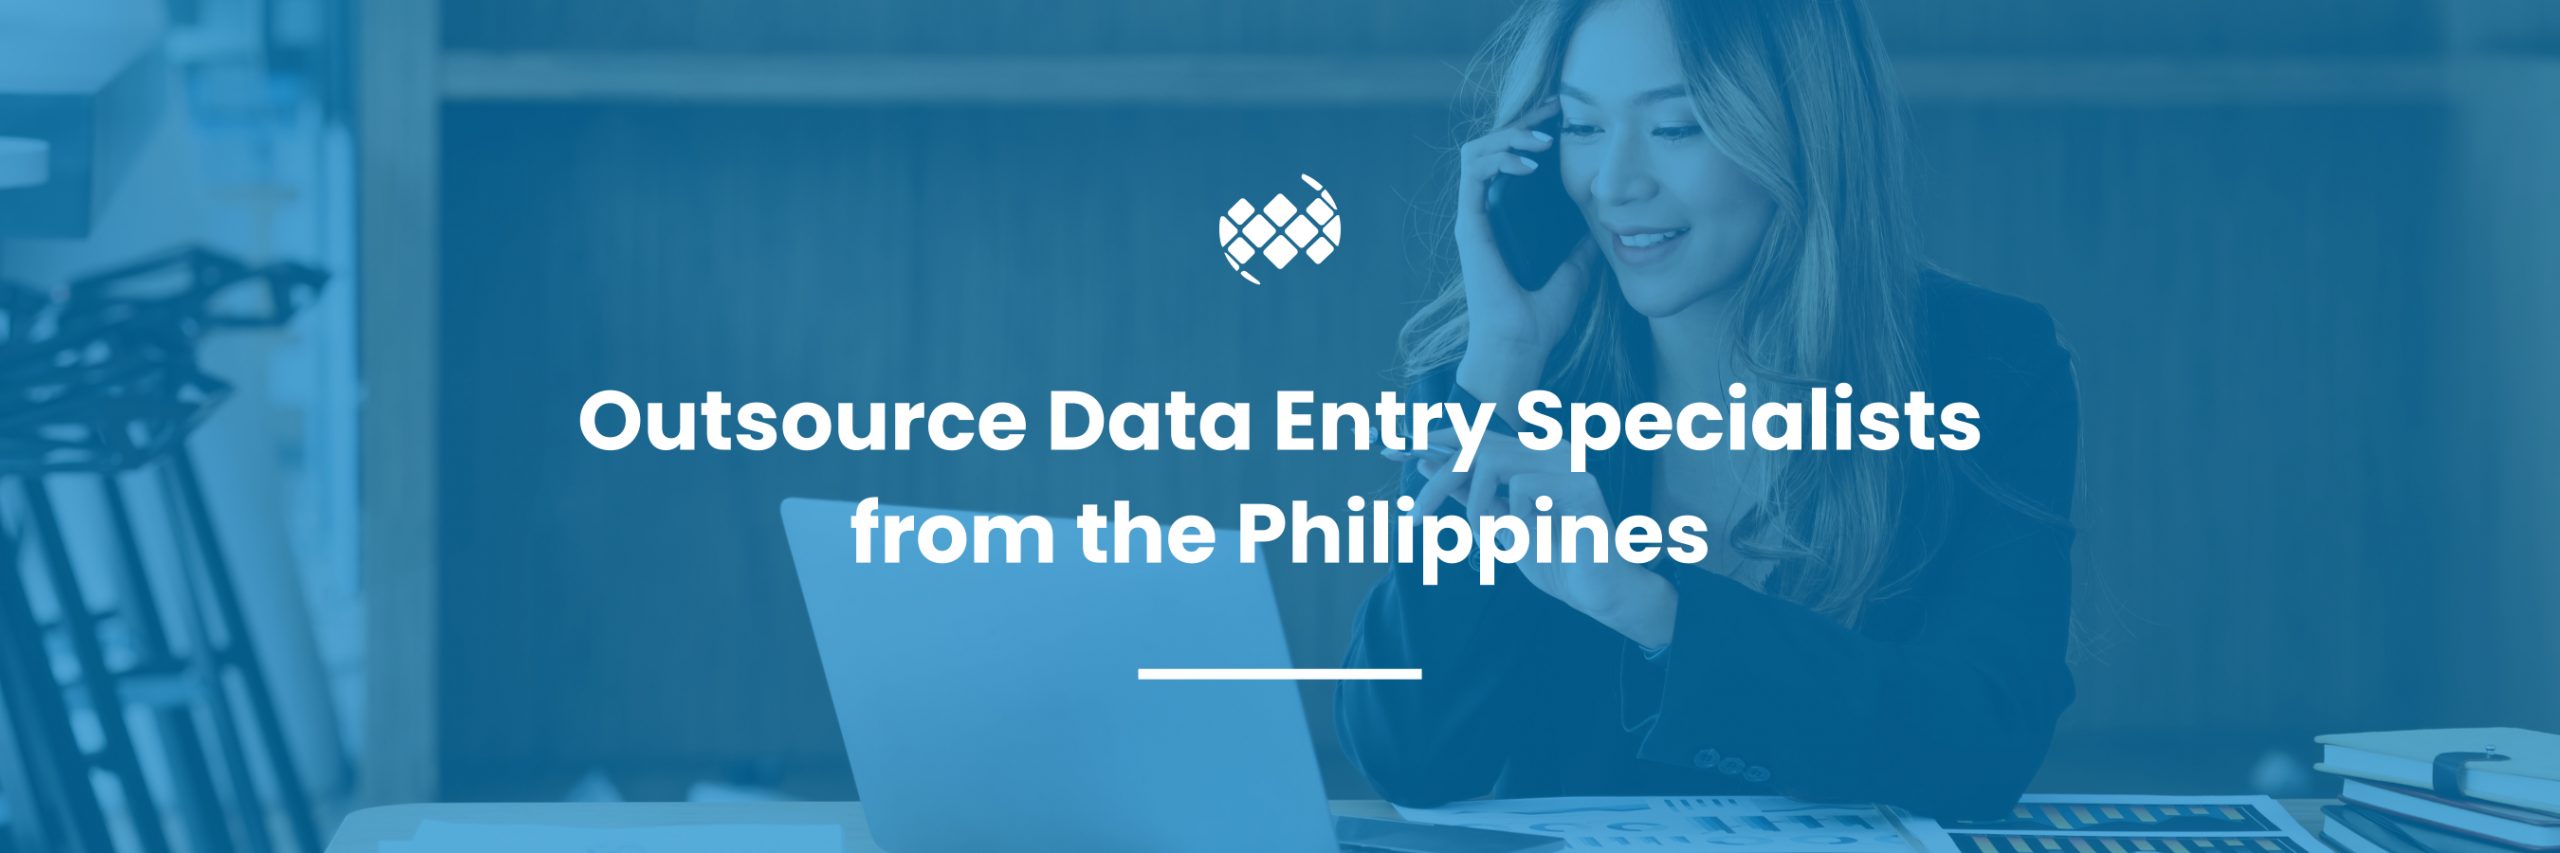 Outsource data entry specialists from the Philippines